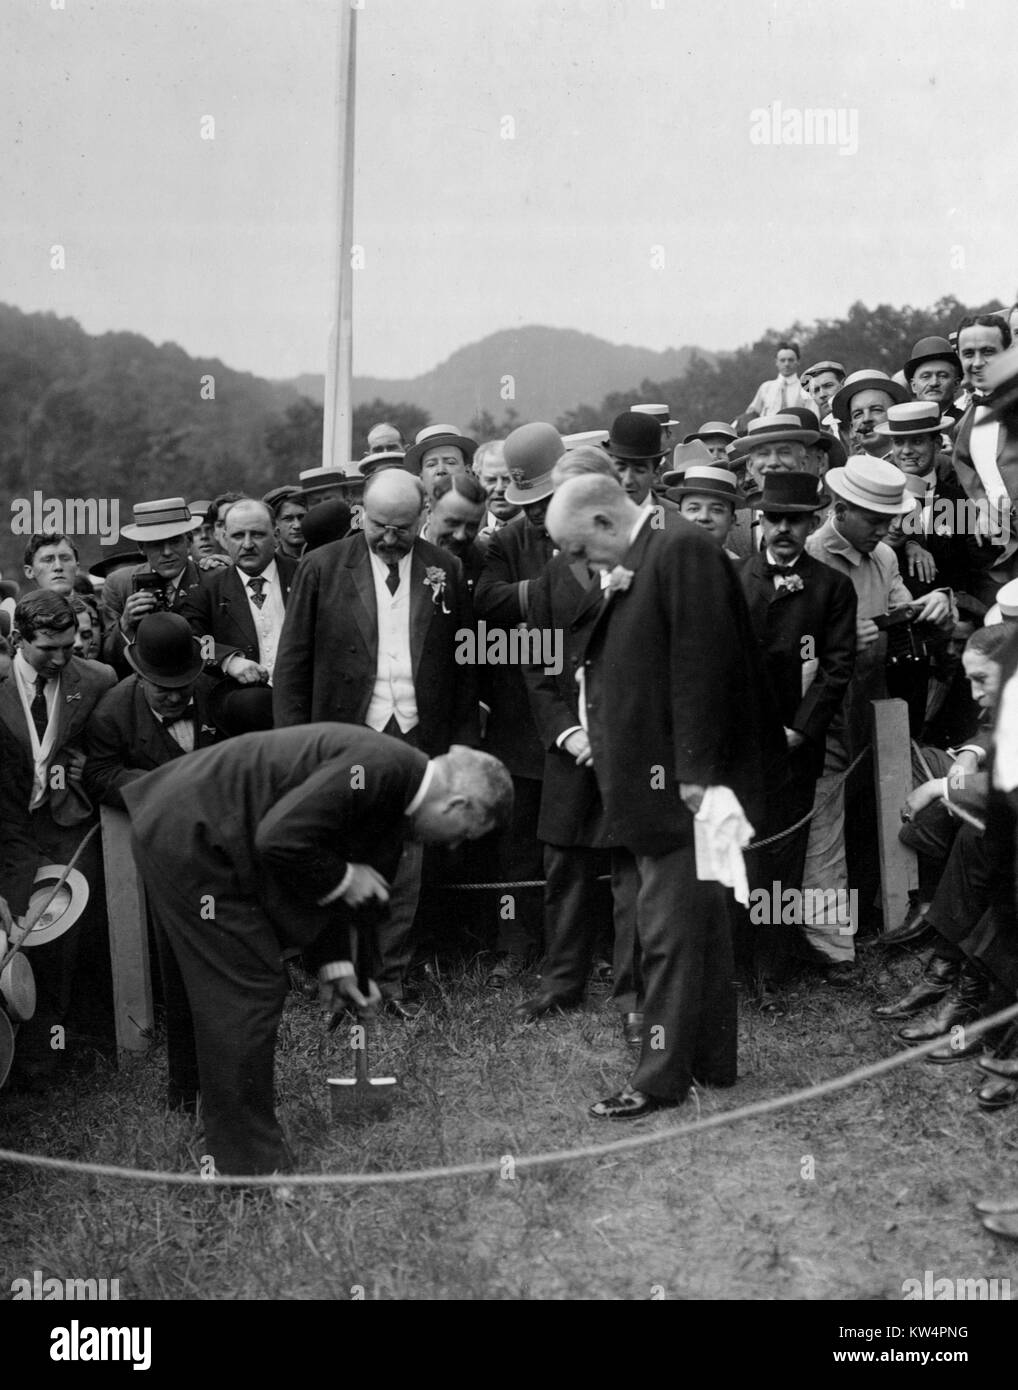 Mayor George B McClellan turning the first sod at Indian brook at the ceremonies celebrating the inauguration of construction work on the Catskill Aqueduct, June 20, 1907. From the New York Public Library. Stock Photo